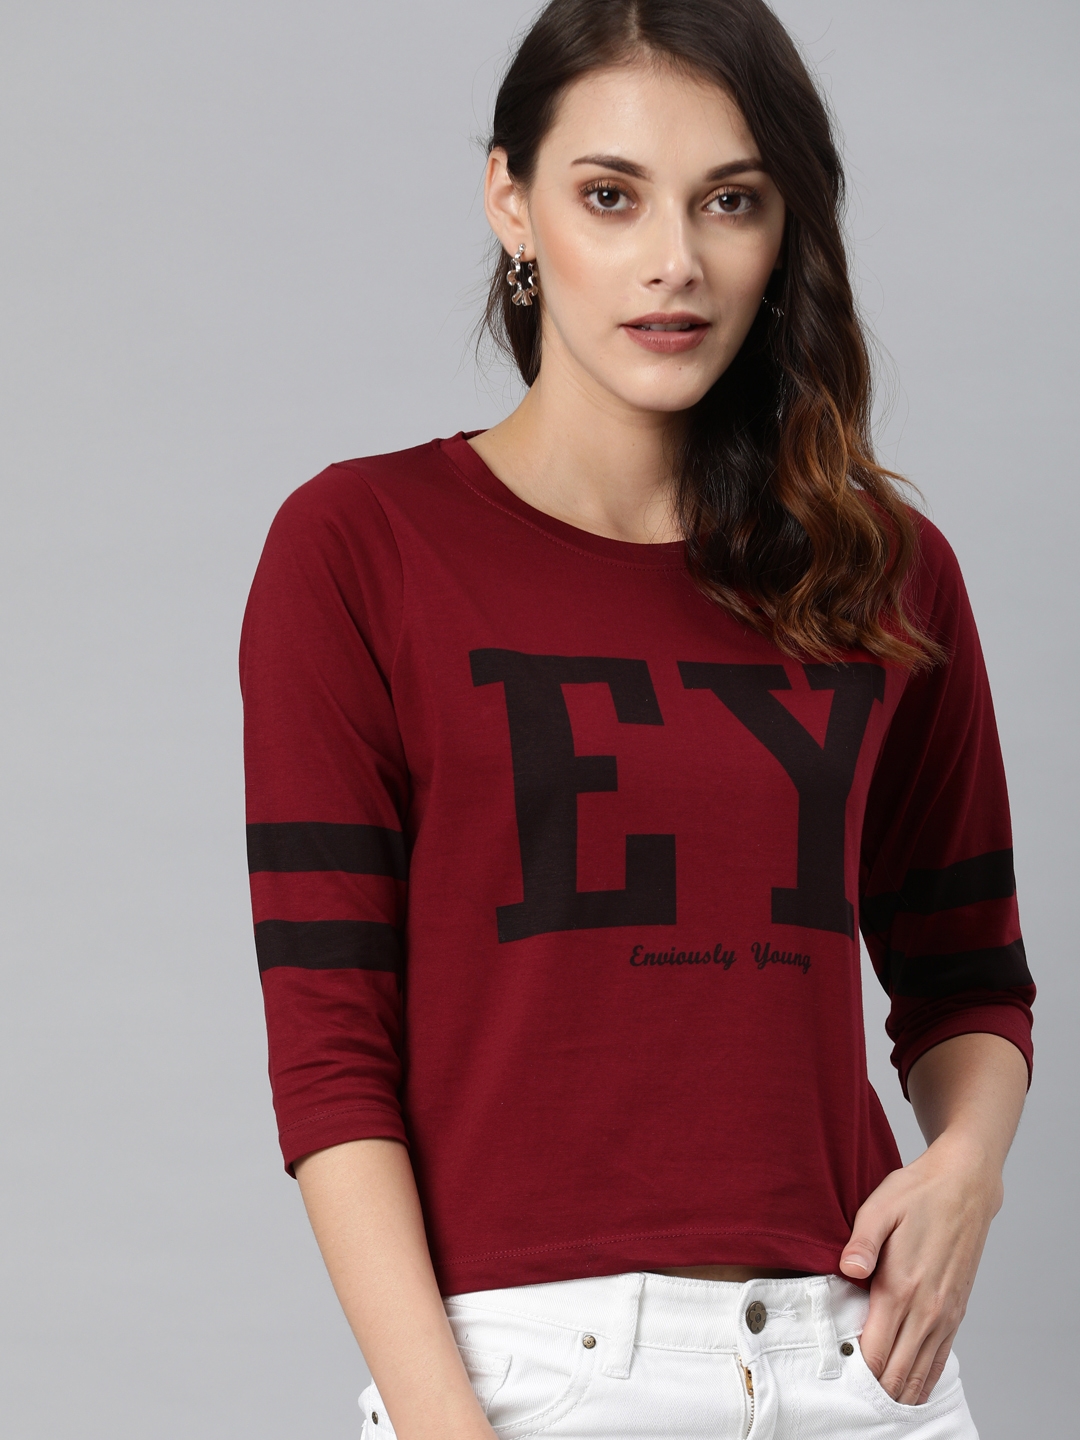 Enviously Young | Red Printed T-Shirts